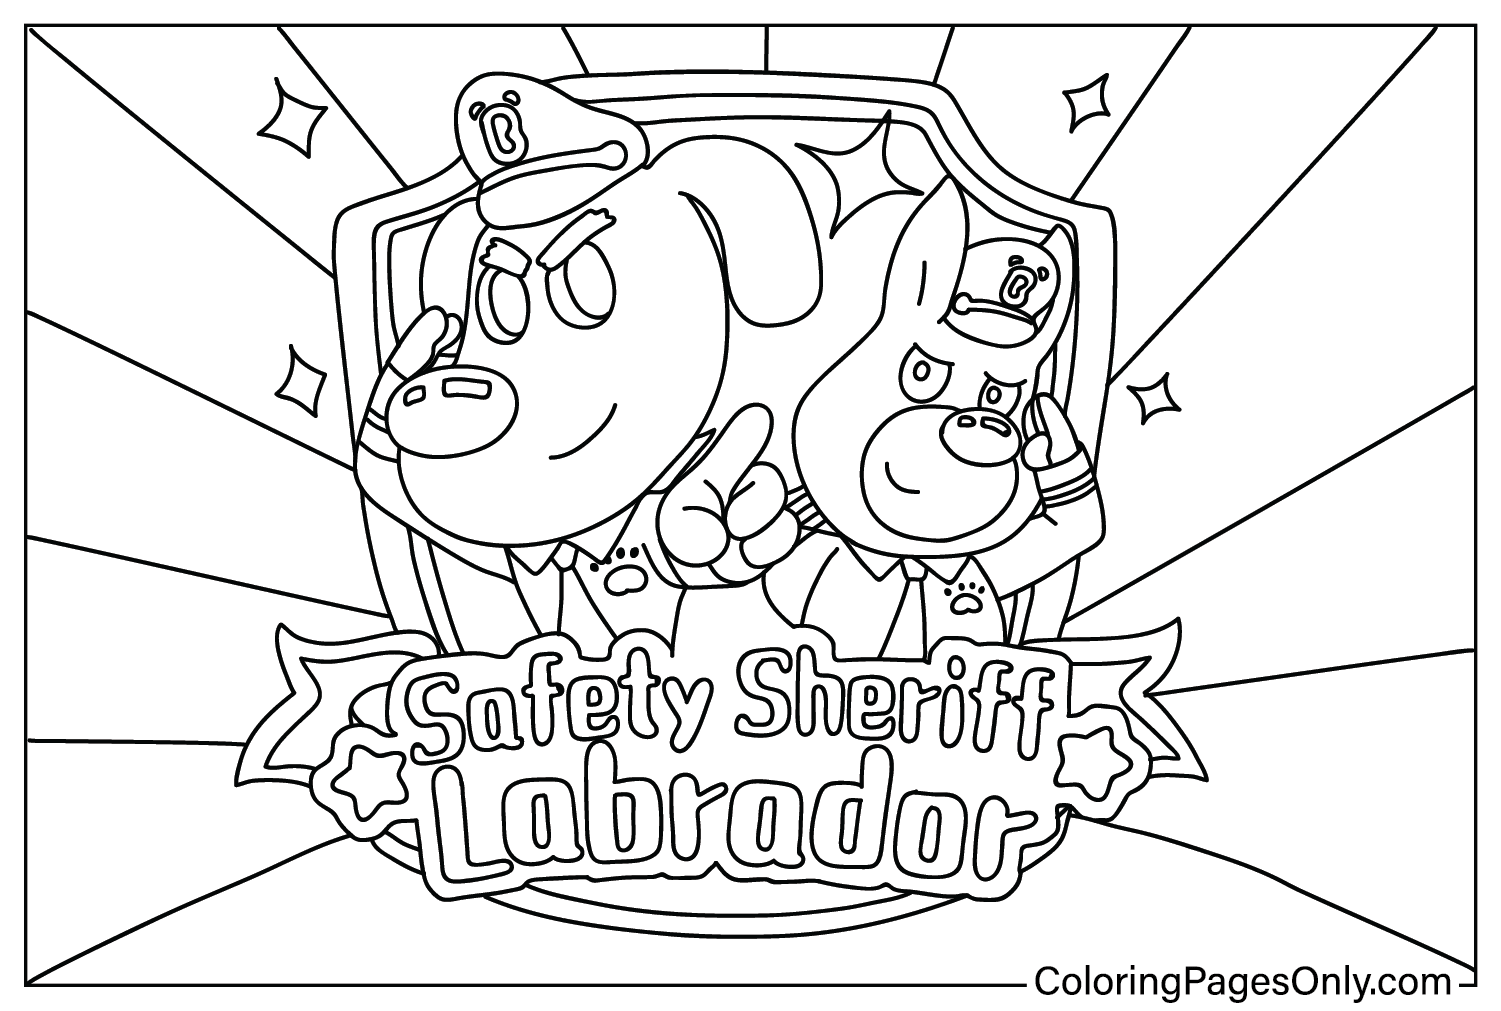 Safety Sheriff Labrador Coloring Pages to for Kids from Safety Sheriff Labrador